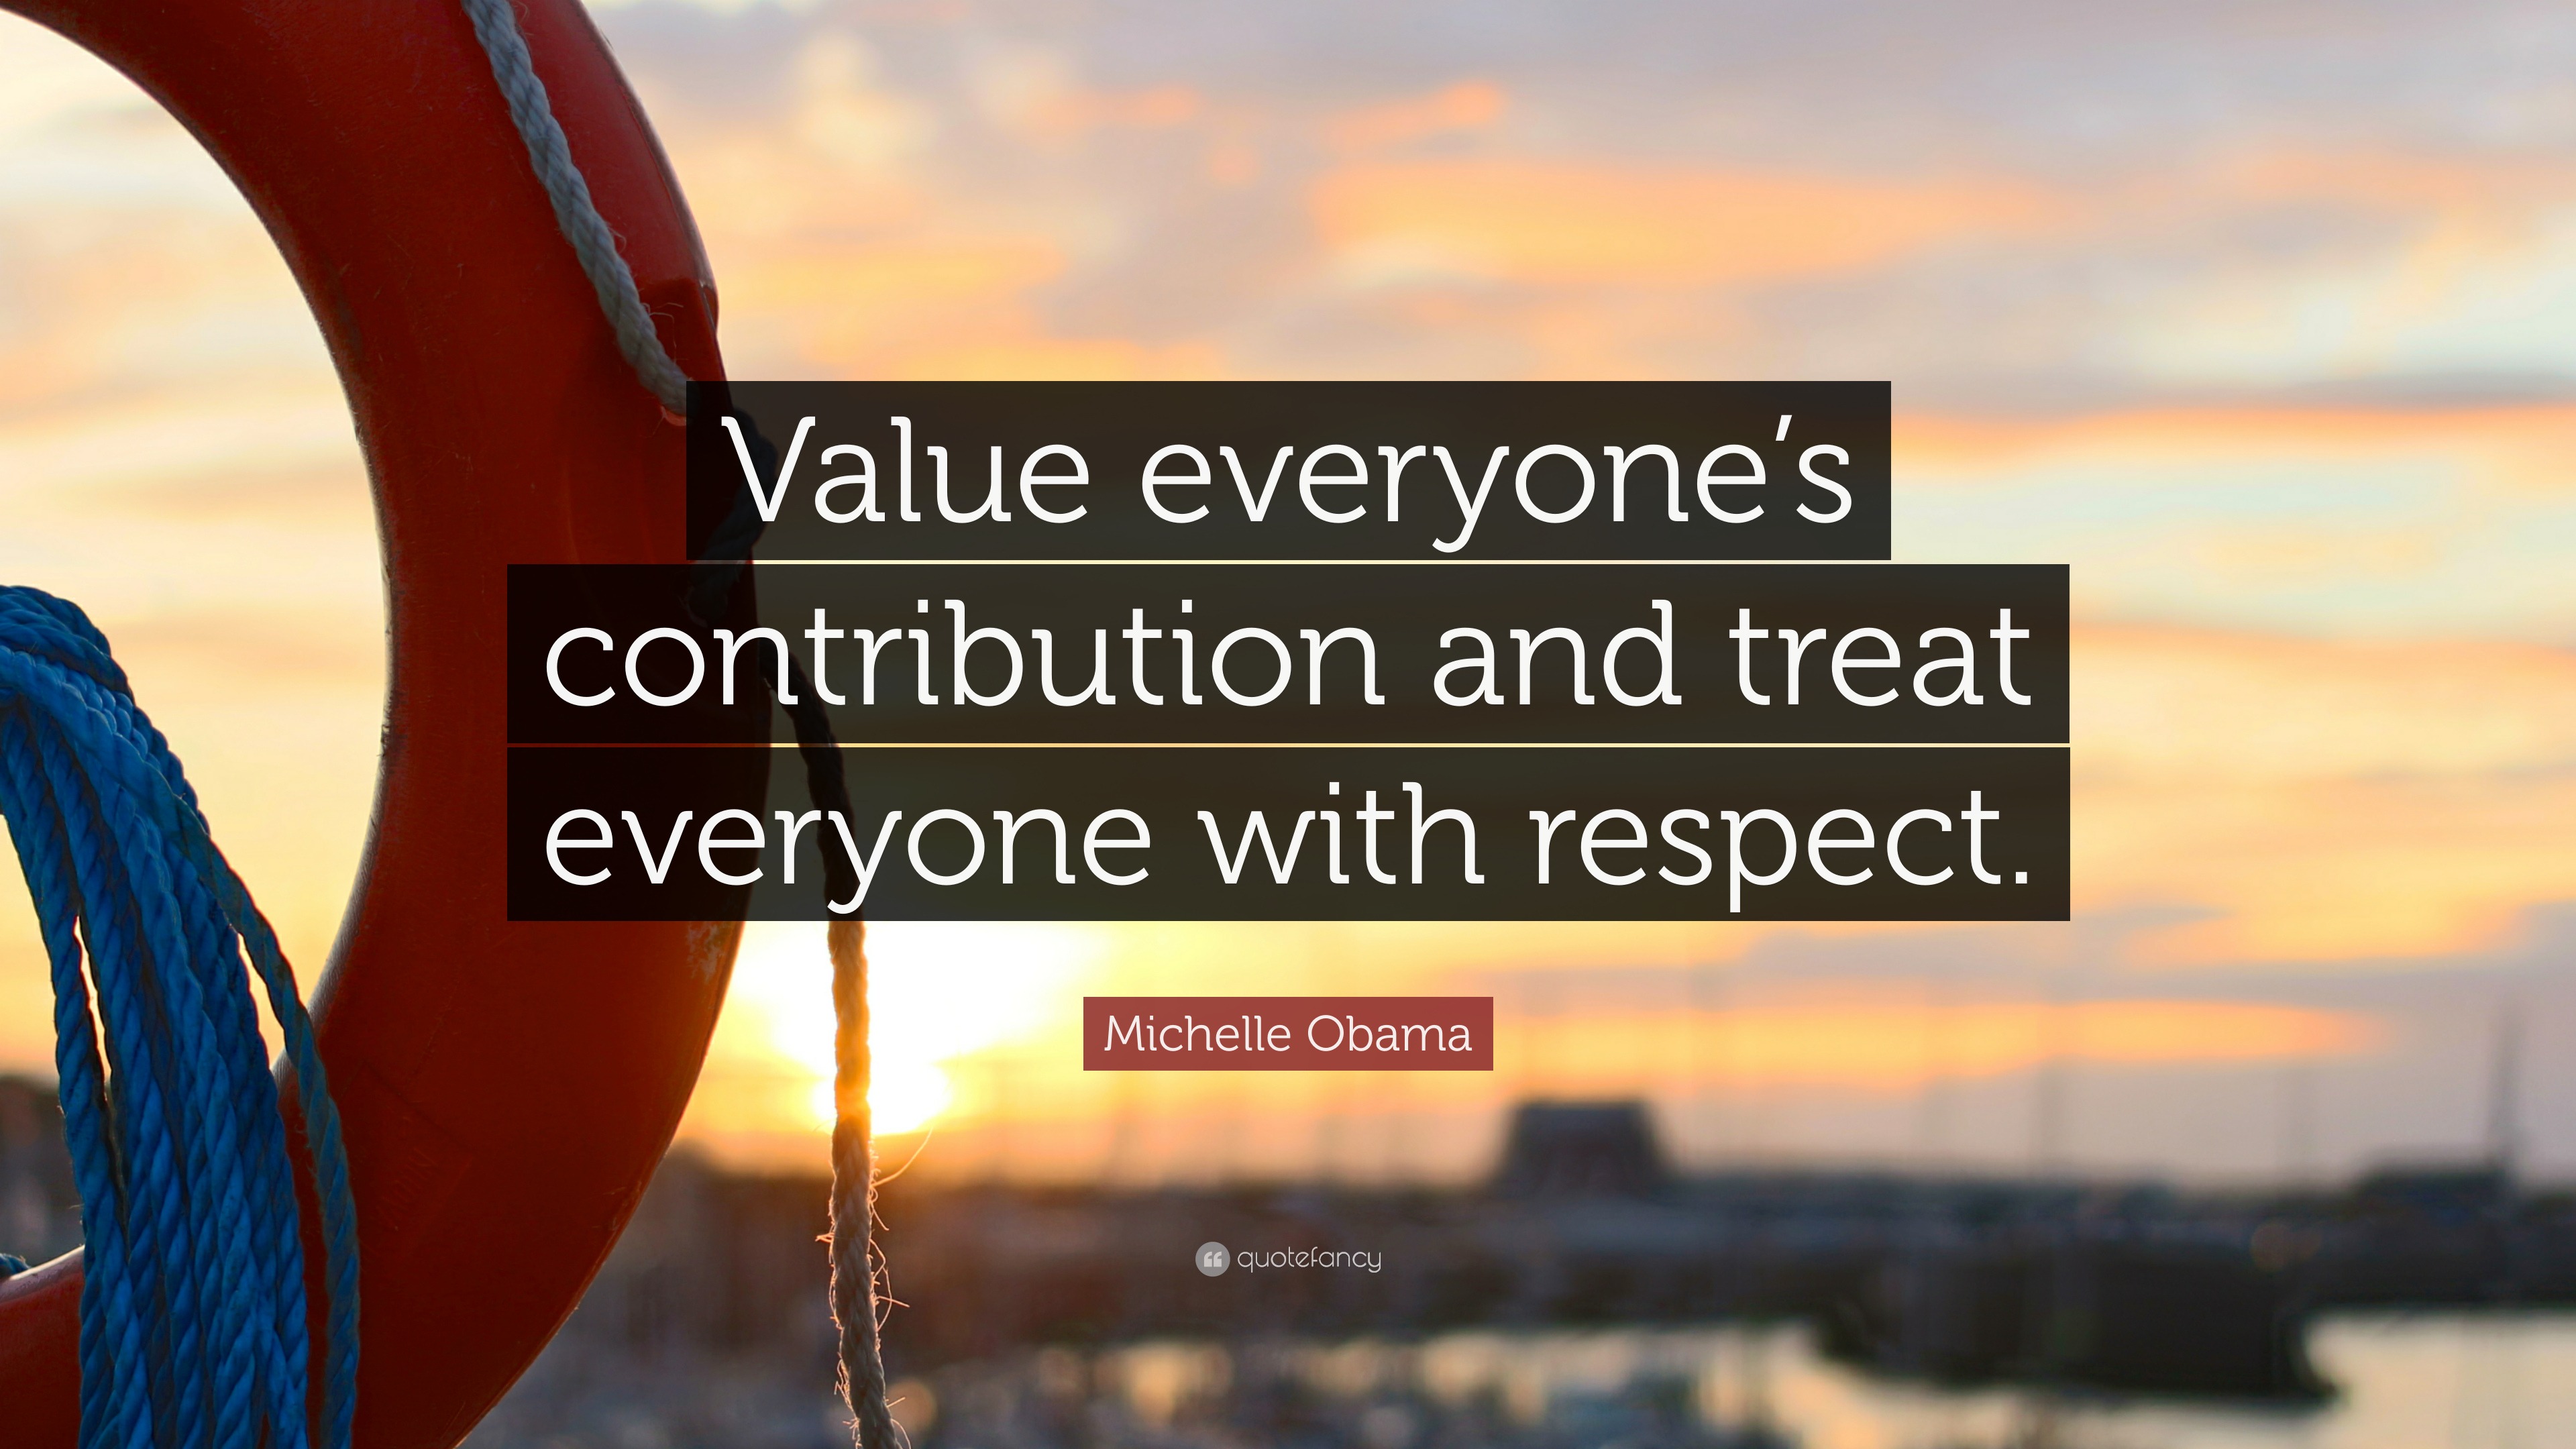 Michelle Obama Quote: “Value everyone’s contribution and treat everyone